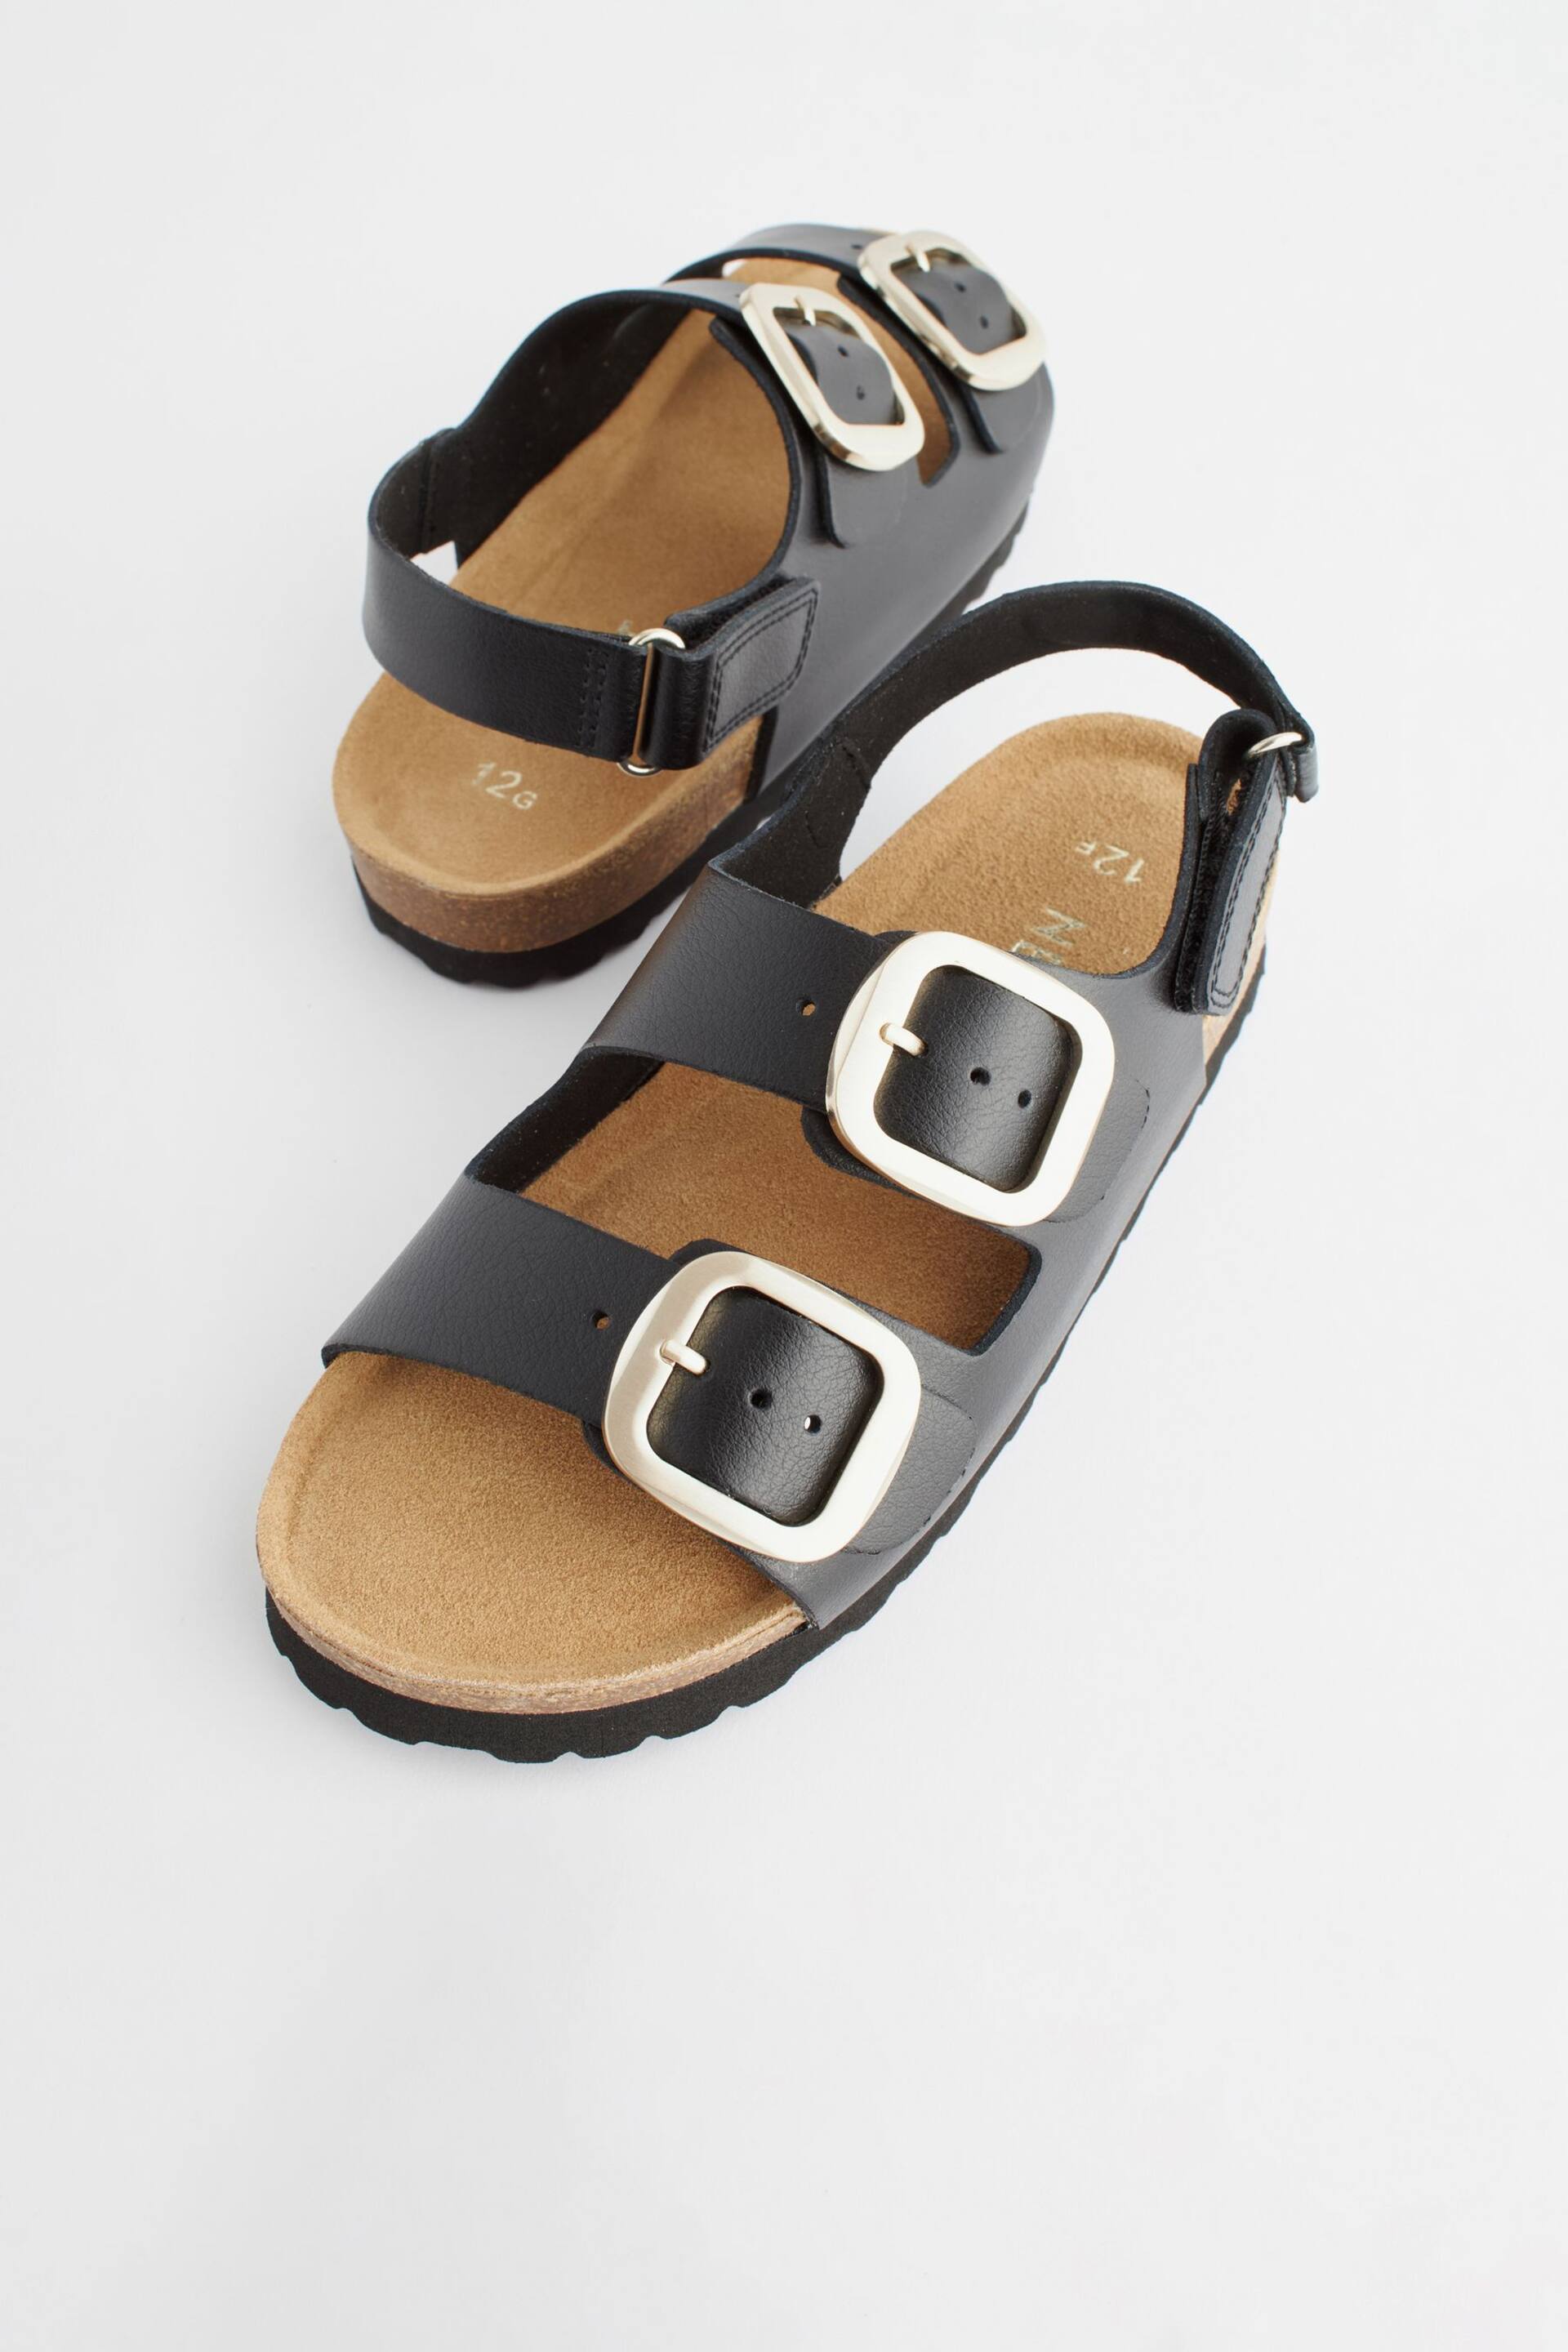 Black Leather Wide Fit (G) Two Strap Corkbed Sandals - Image 6 of 8